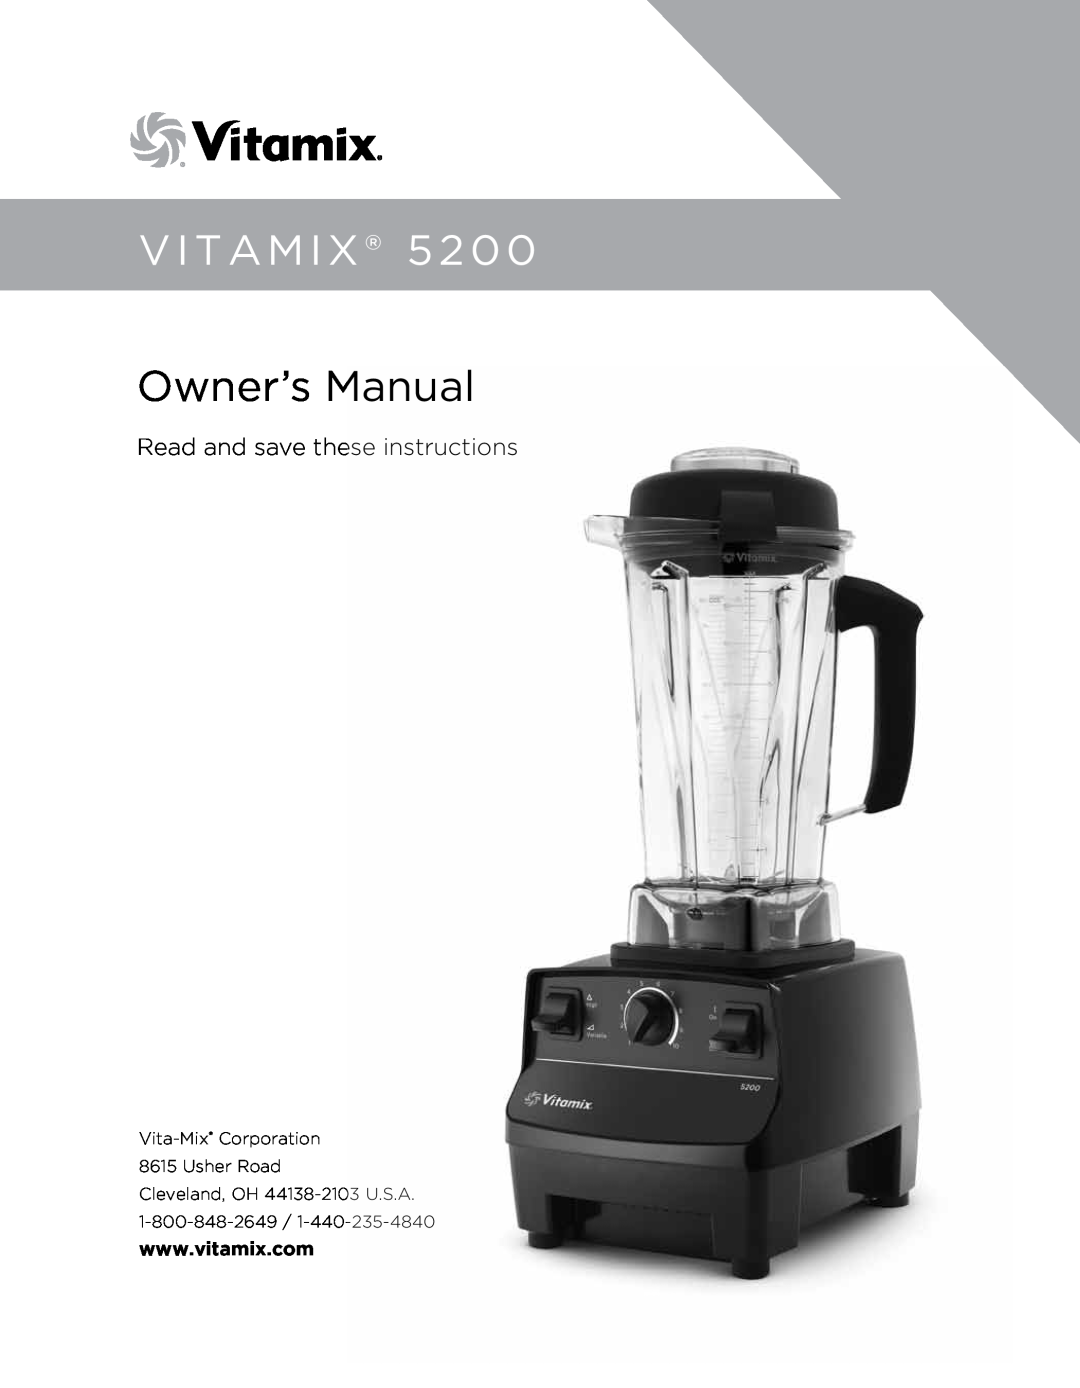 Vita-Mix 5200 owner manual Owner’s Manual, Vitamix, Read and save these instructions 